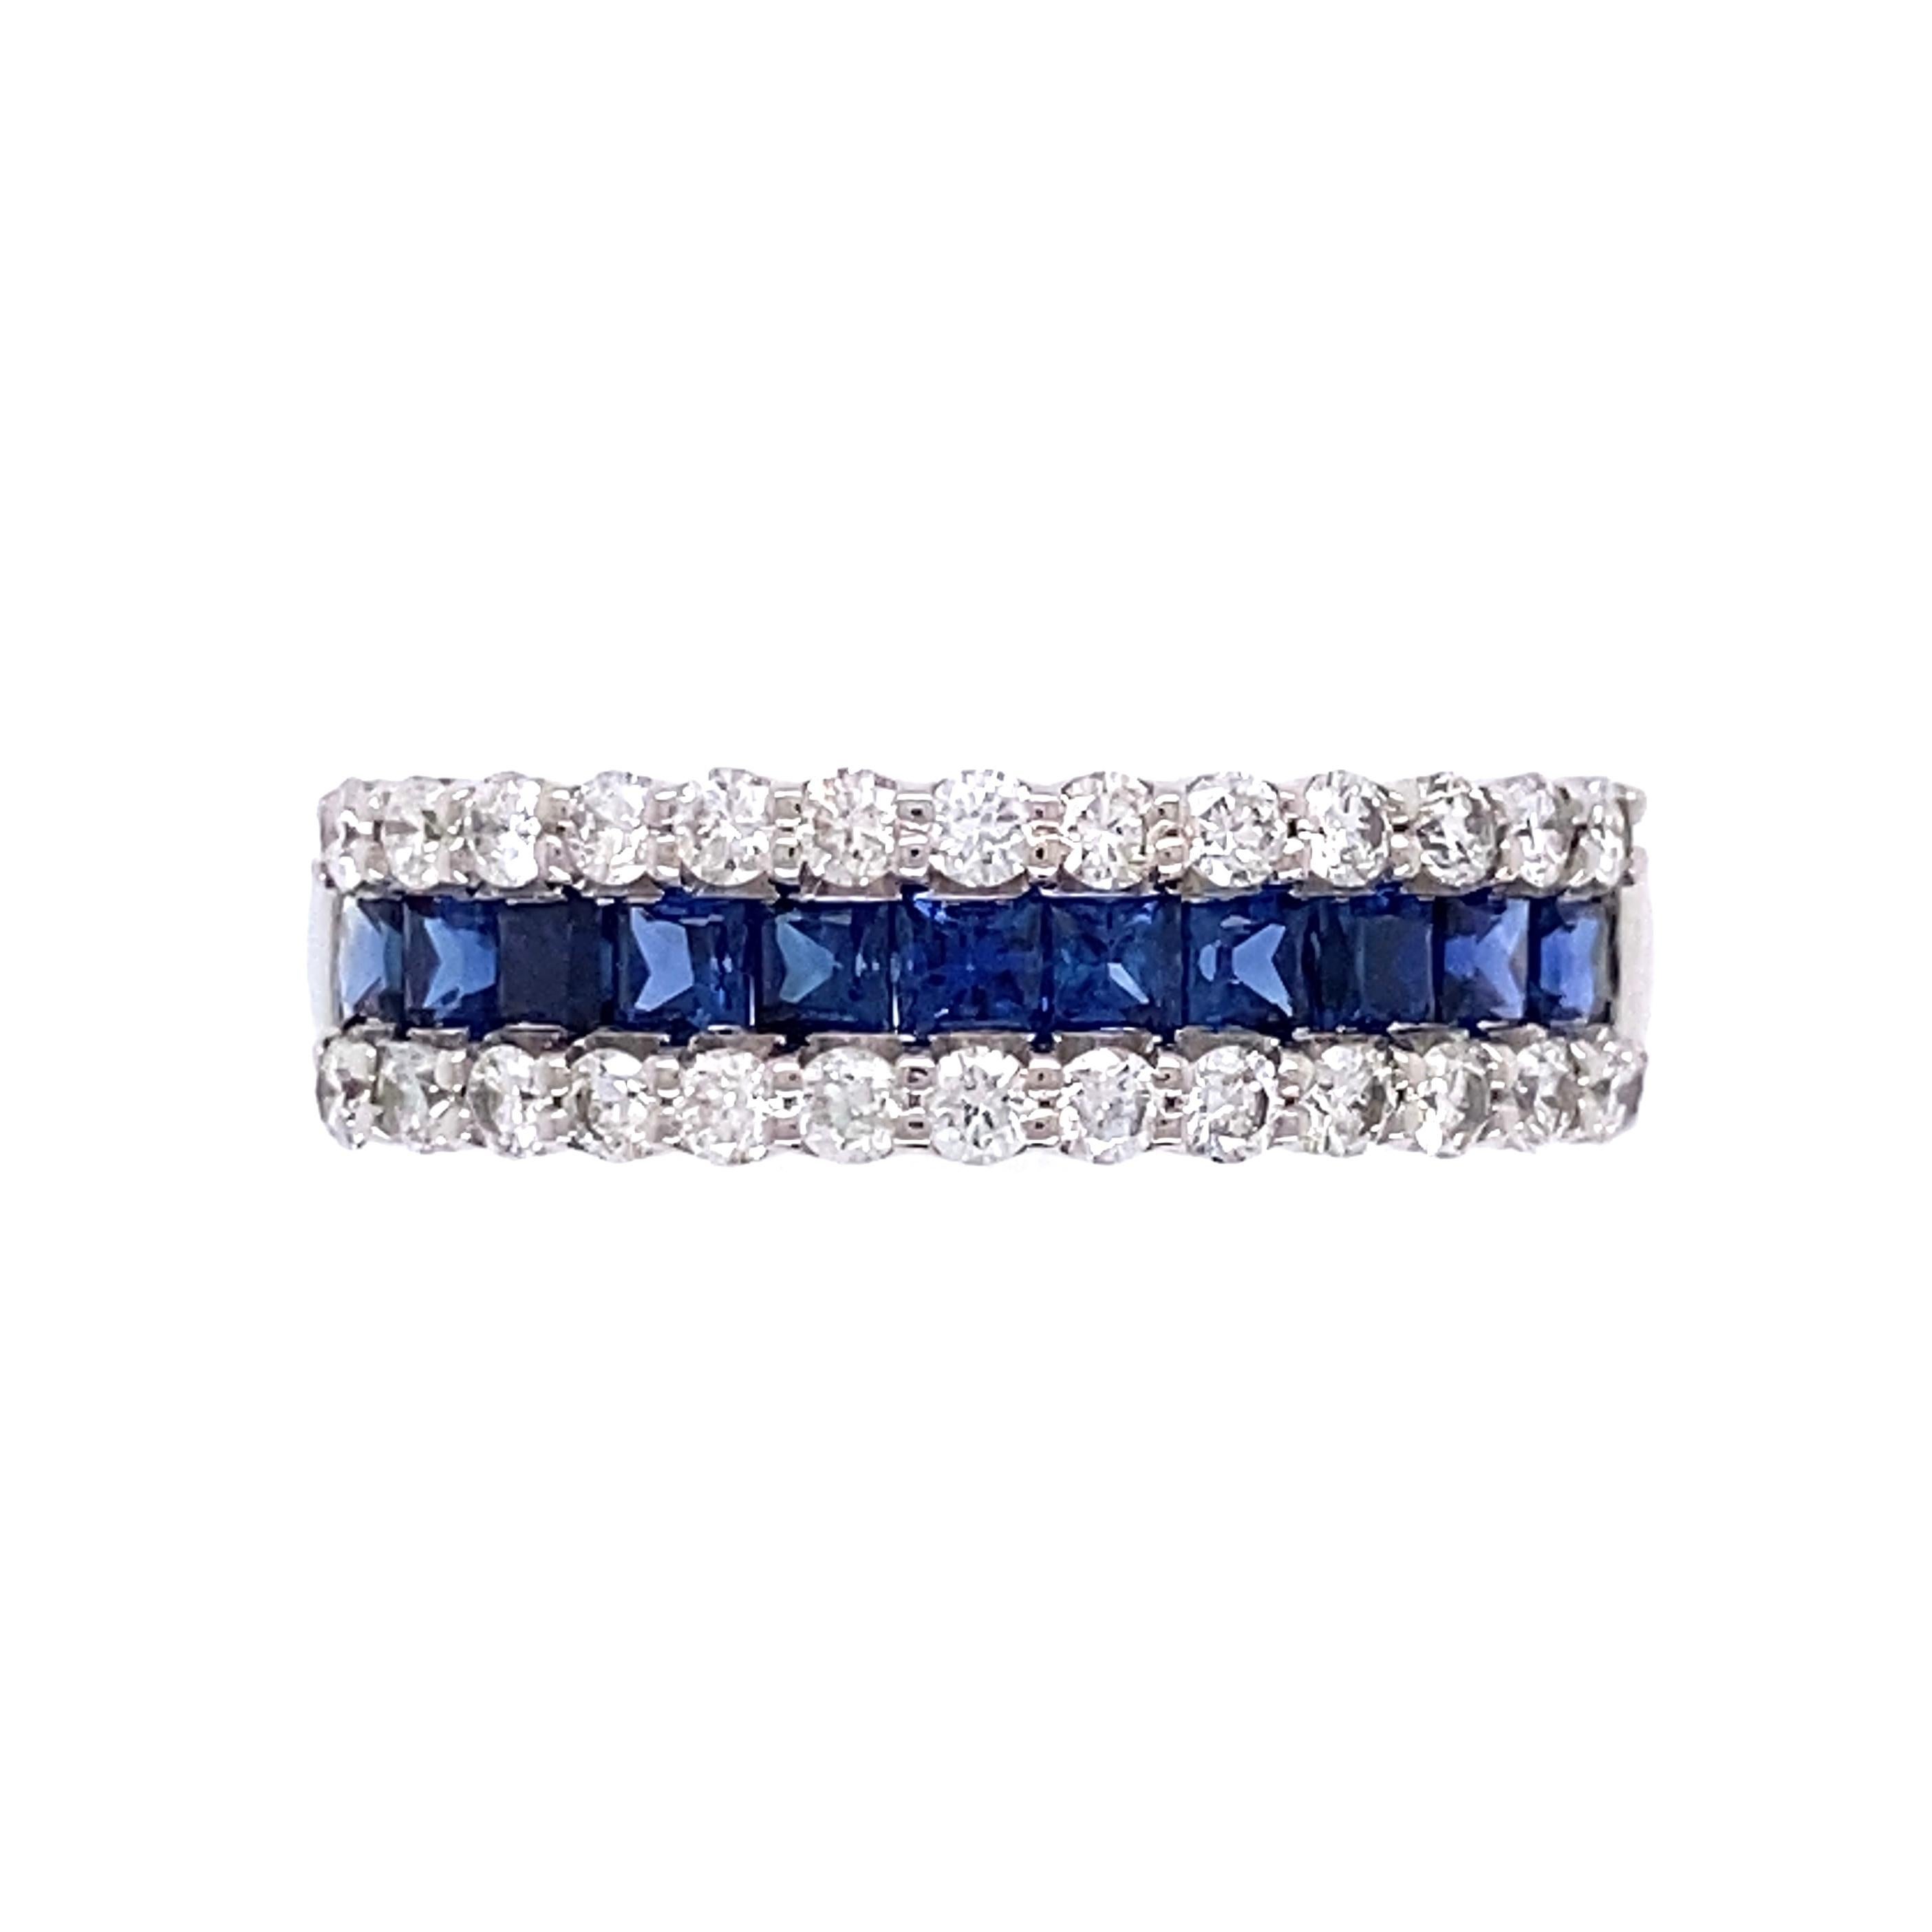 Simply Beautiful! Platinum Band Cocktail Ring, securely set with Fine high-quality Sapphires, weighing approx. 0.71tcw and Diamonds weighing approx. 0.42tcw. Hand crafted in Platinum. Measuring approx. 5.54mm. Ring size 6, we offer ring resizing.